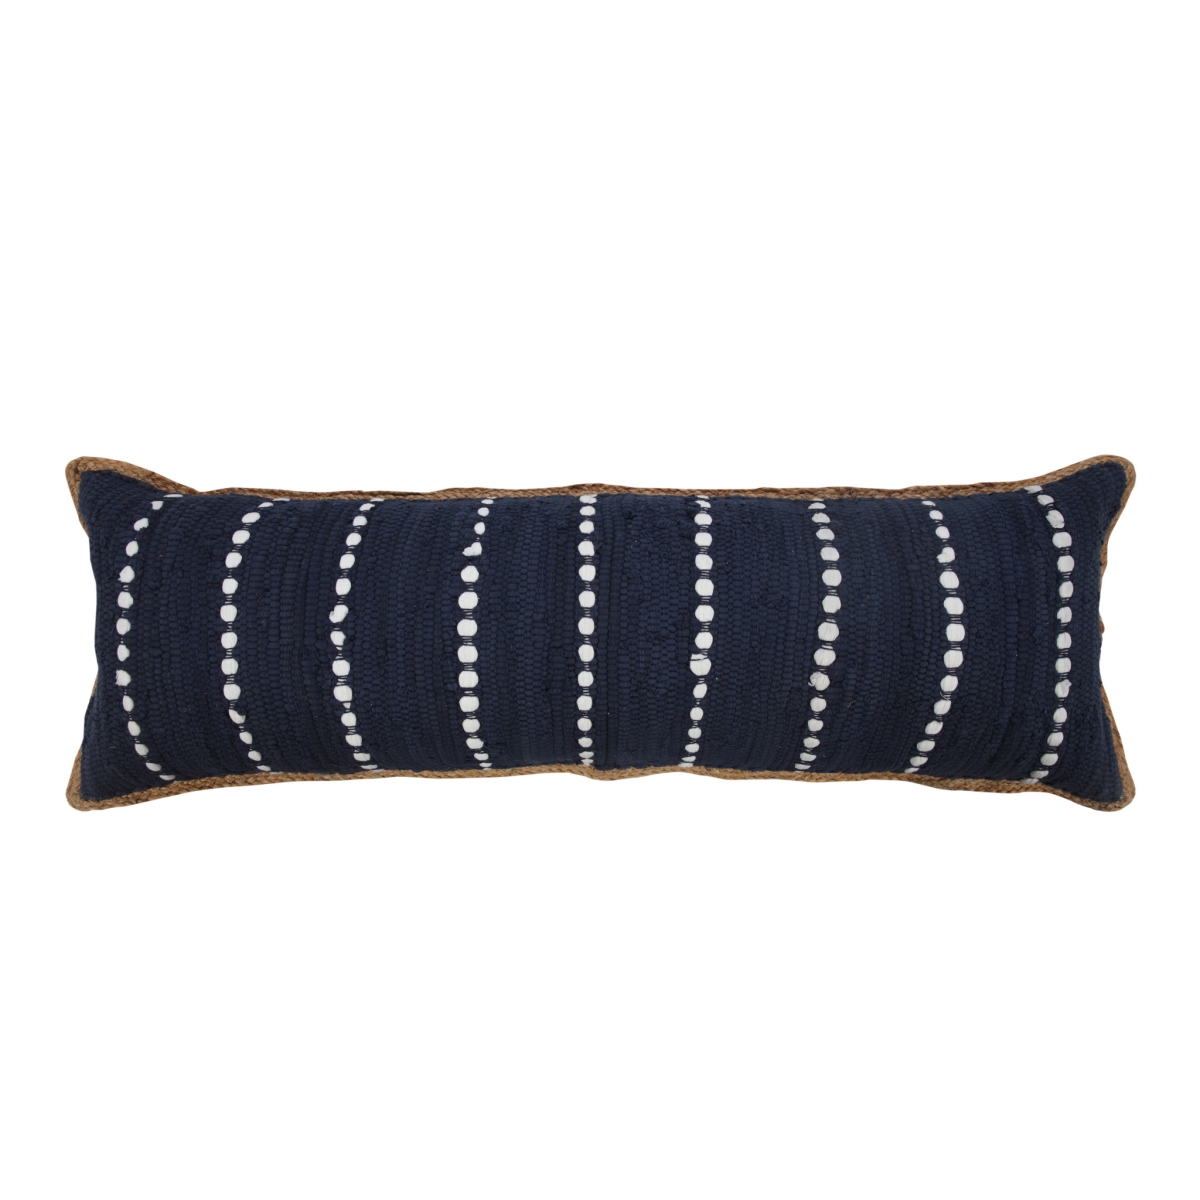 Picture of HomeRoots 517378 14 x 36 in. Blue & Beige Striped Cotton Blend Zippered Pillow